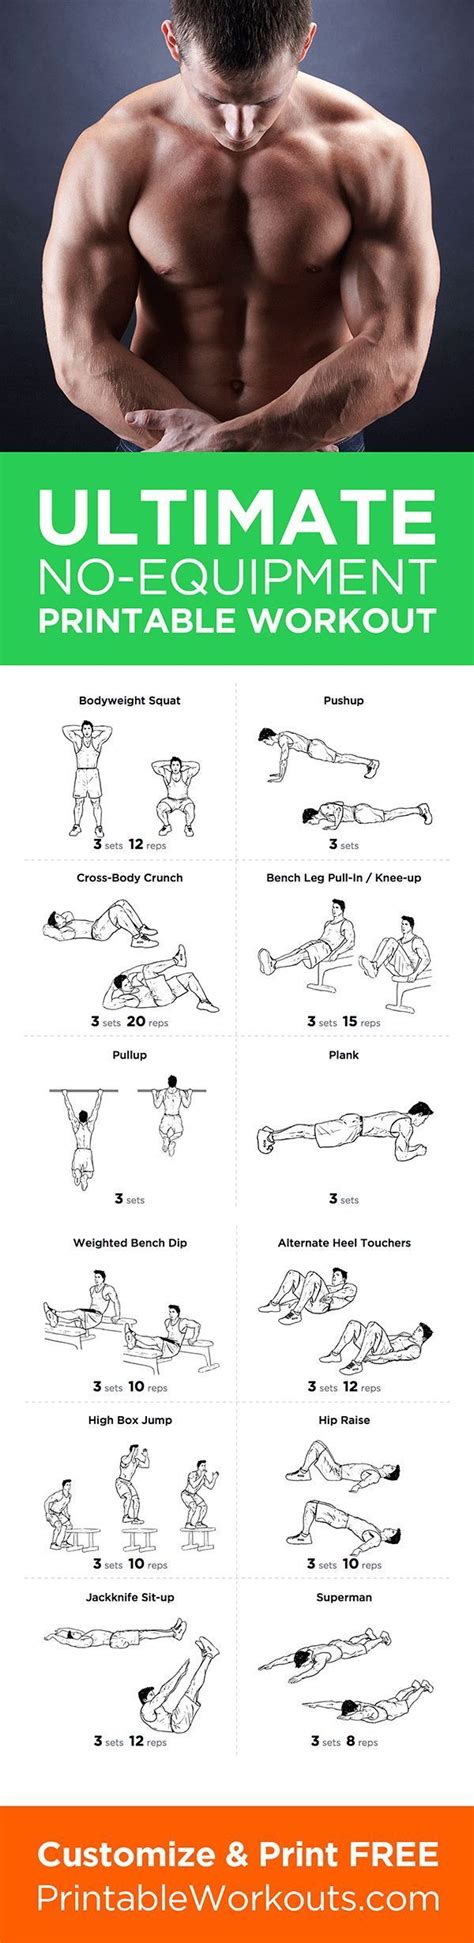 Try This Full Body No Equipment At Home Printable Workout